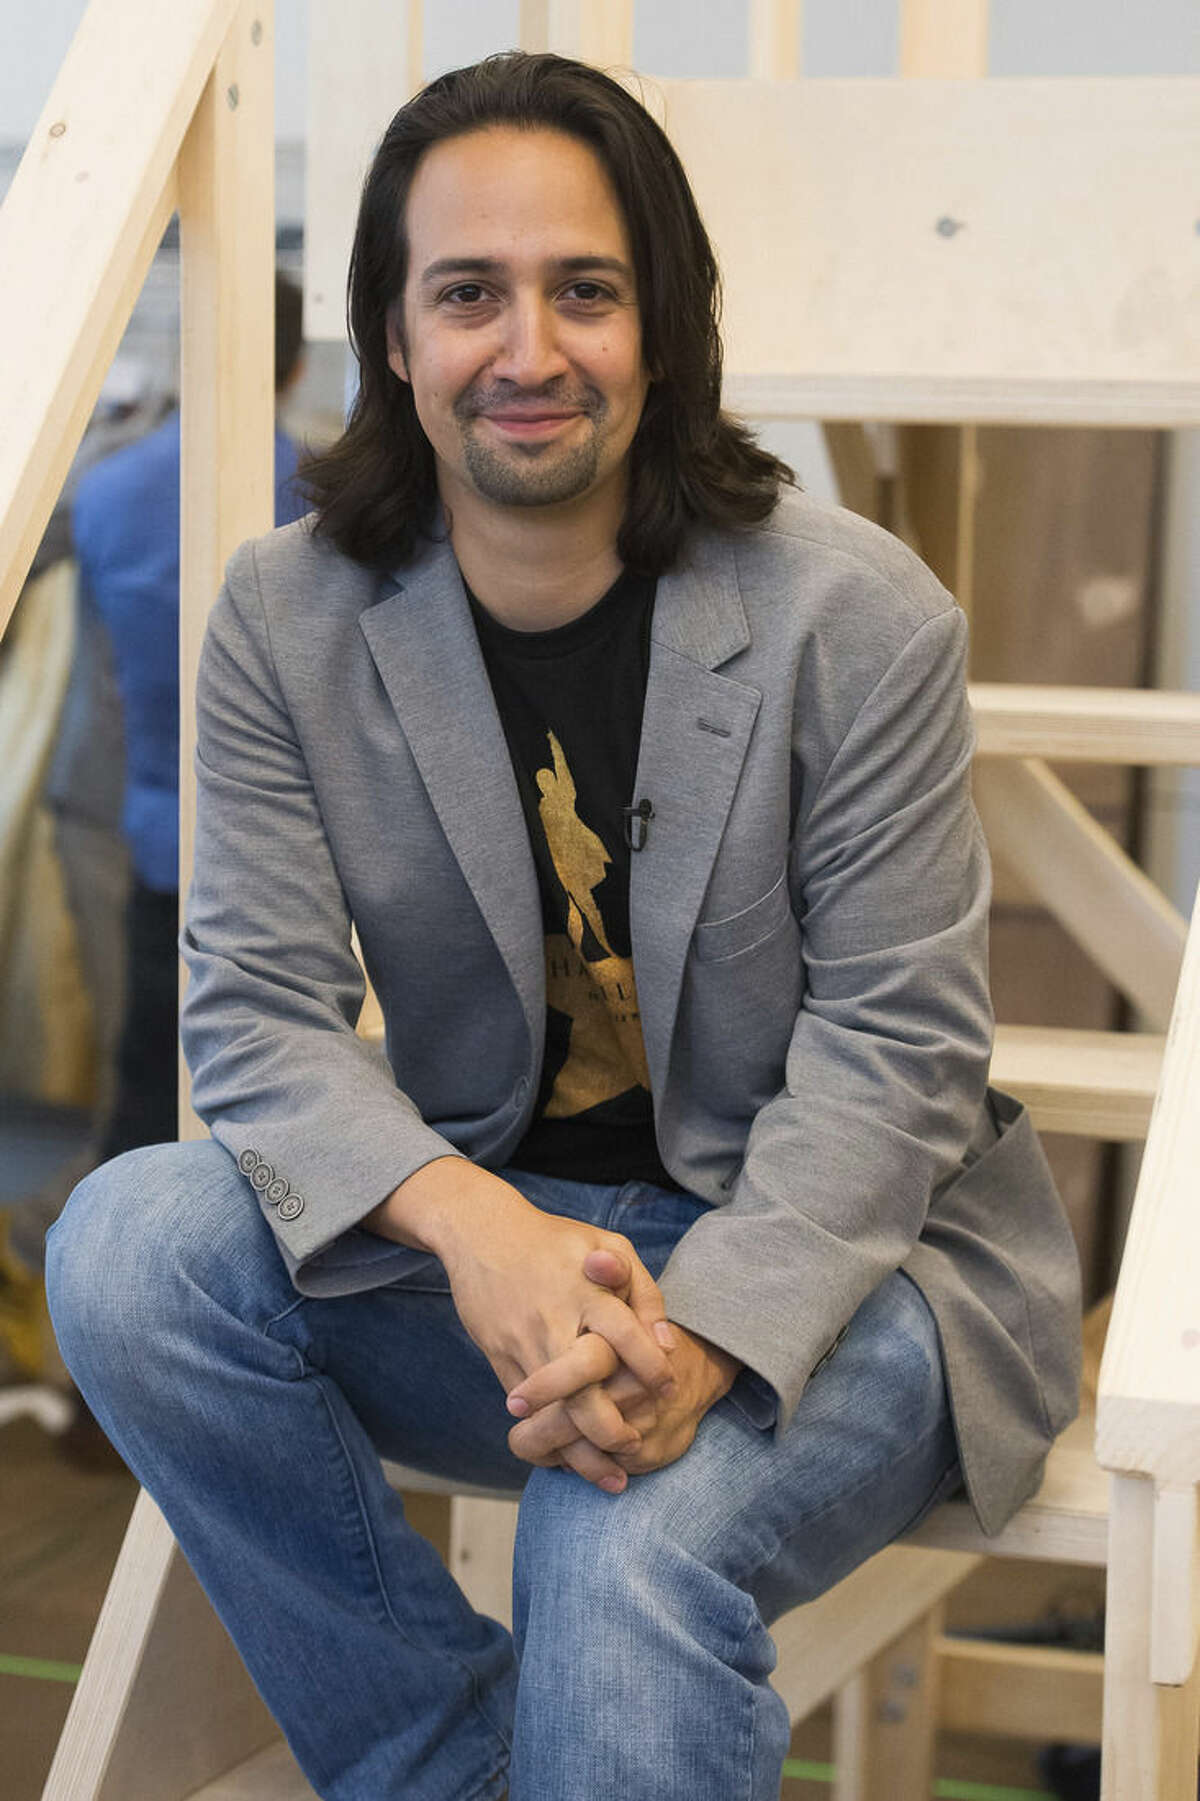 FILE - In this June 18, 2015 file photo, author and star of the Broadway-bound musical "Hamilton," Lin-Manuel Miranda, begins rehearsals at the New 42nd Street Studios in New York. Few shows in recent memory have excited the New York theater community like Miranda's hip-hop flavored biography about Alexander Hamilton, the nation's first treasury secretary. (Photo by Charles Sykes/Invision/AP, File)